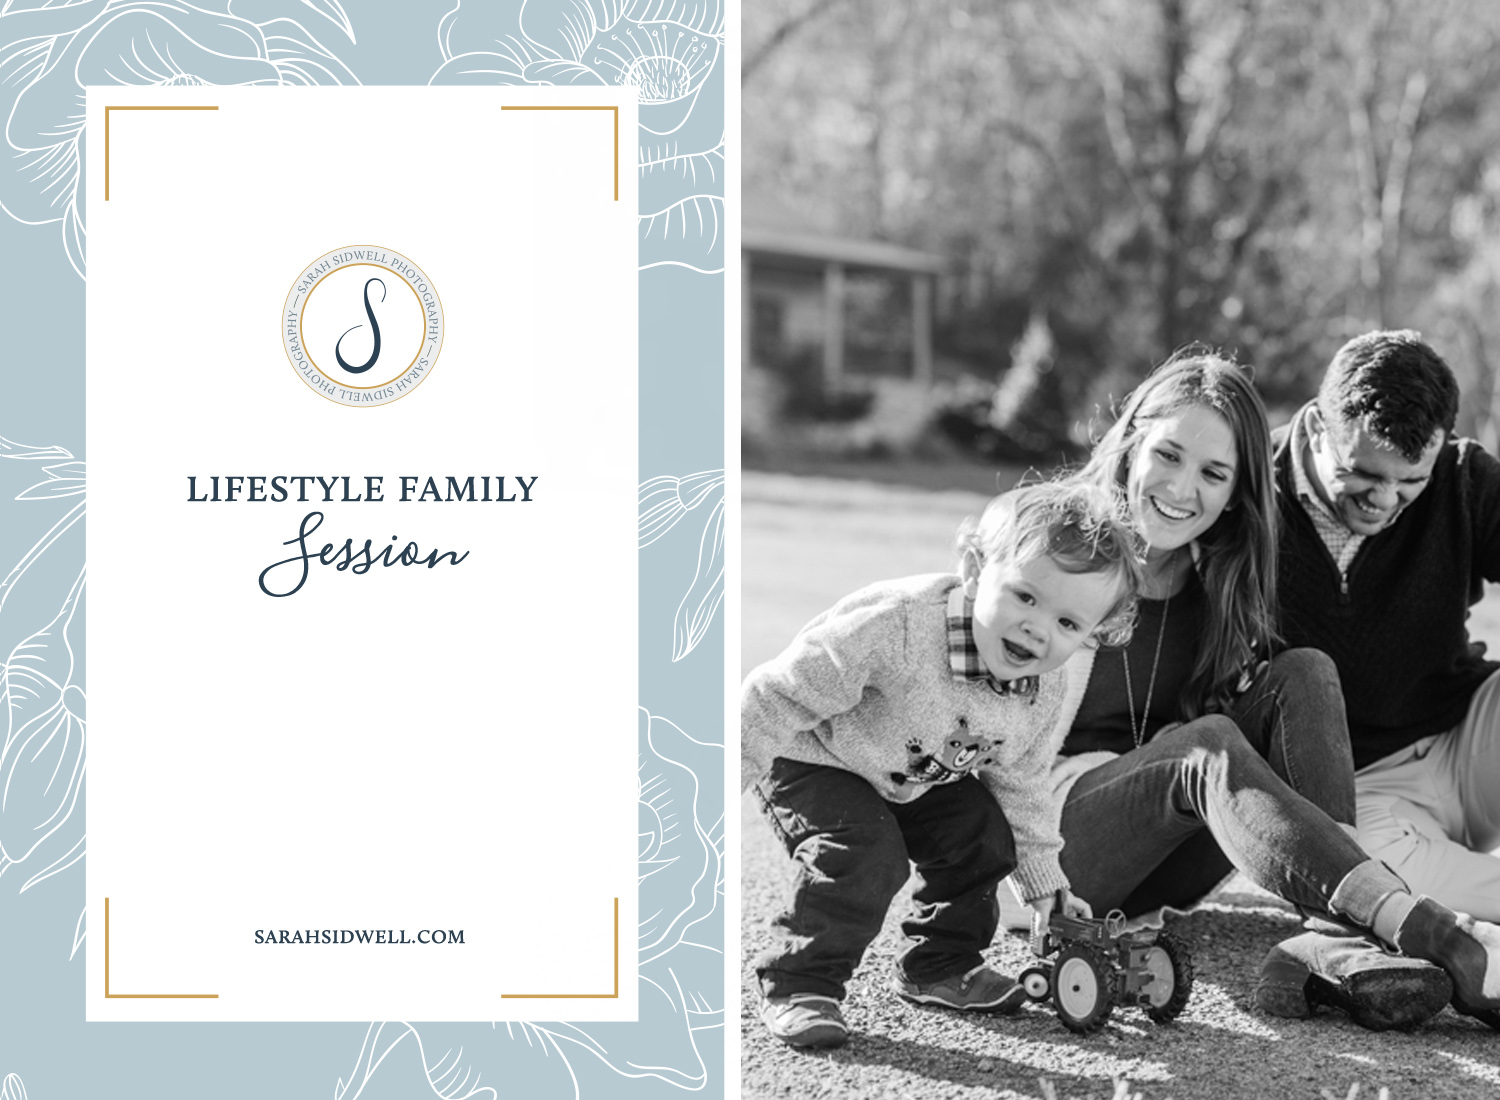 Springhill parents hire award winning Franklin Tennessee based photographer to photograph natural documentary style portaits on their family farm.jpg